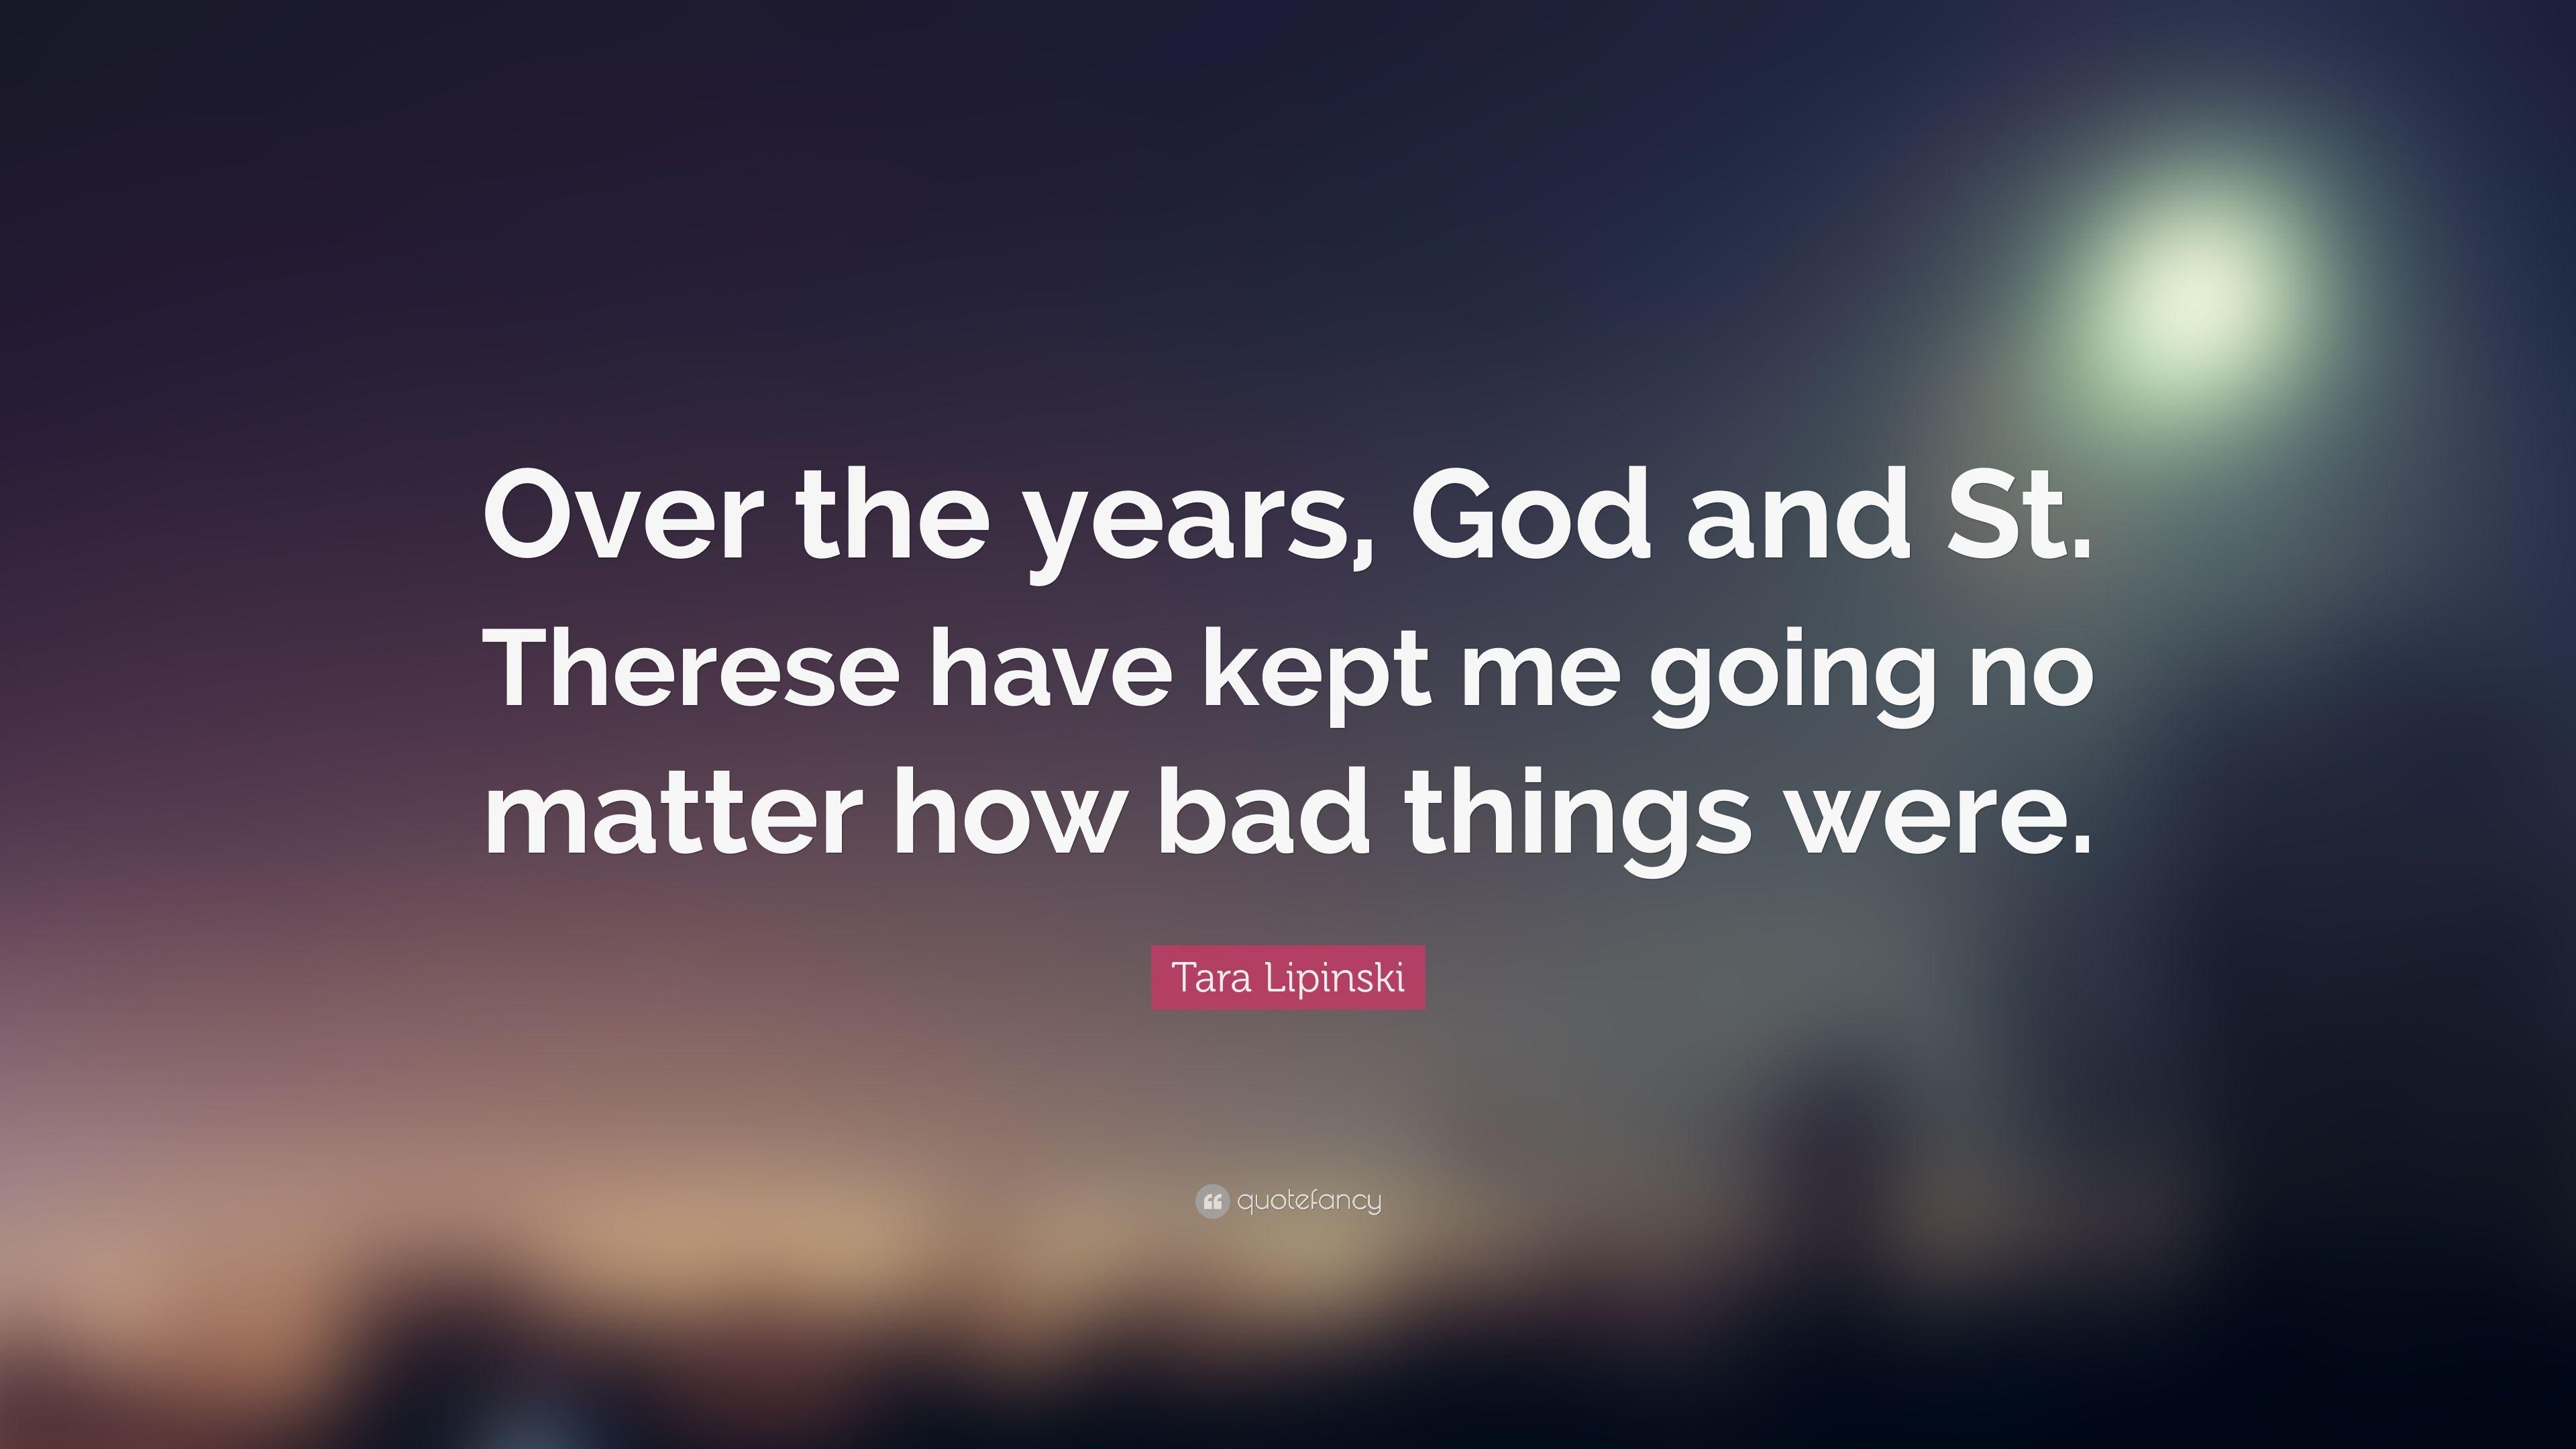 Tara Lipinski Quote: “Over the years, God and St. Therese